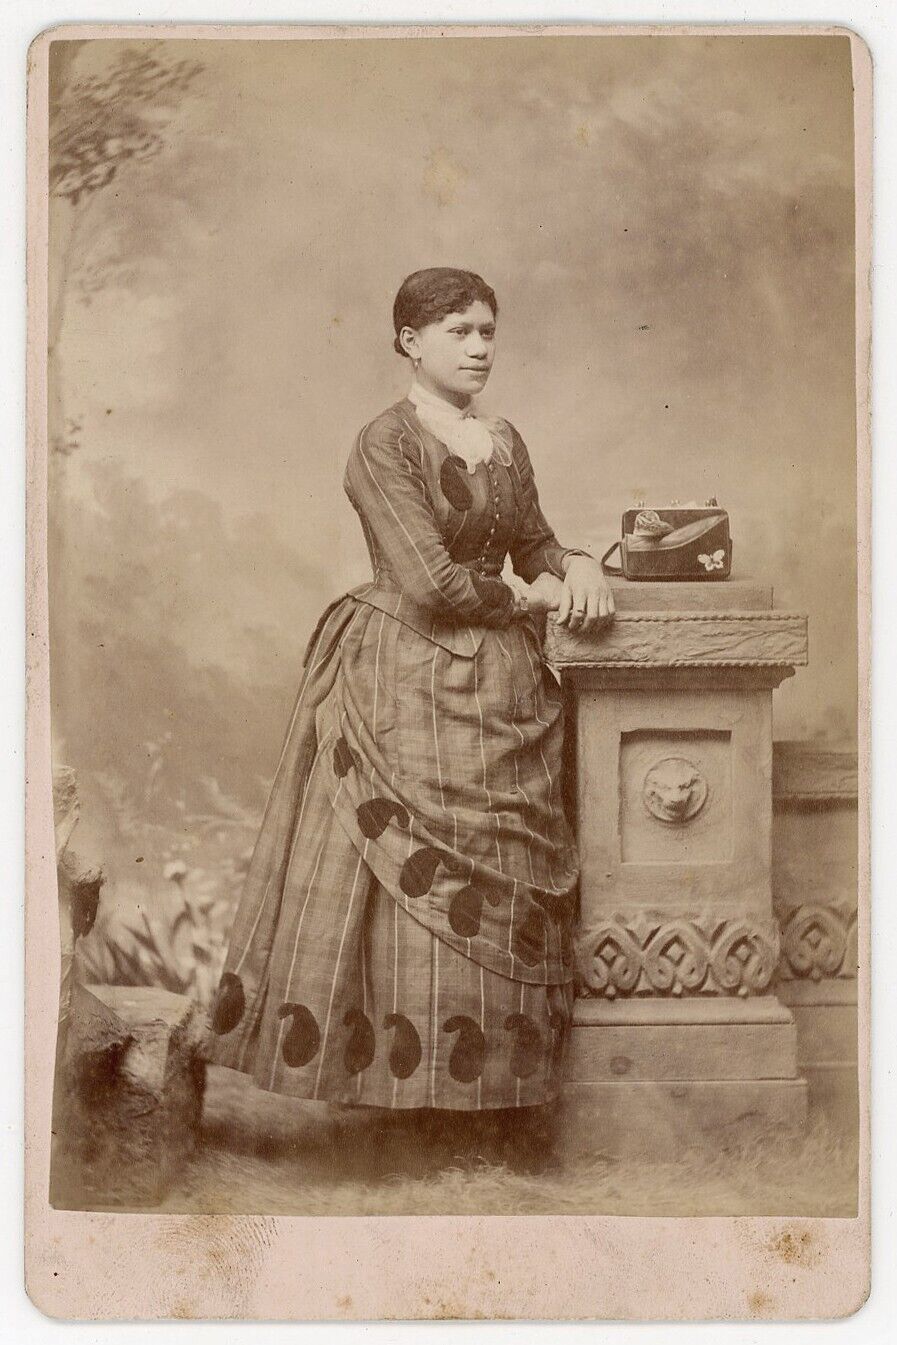 BLACK WOMAN PAISLEY DRESS BUTTERFLY ON PURSE AFRICAN AMERICAN CABINET CARD PHOTO